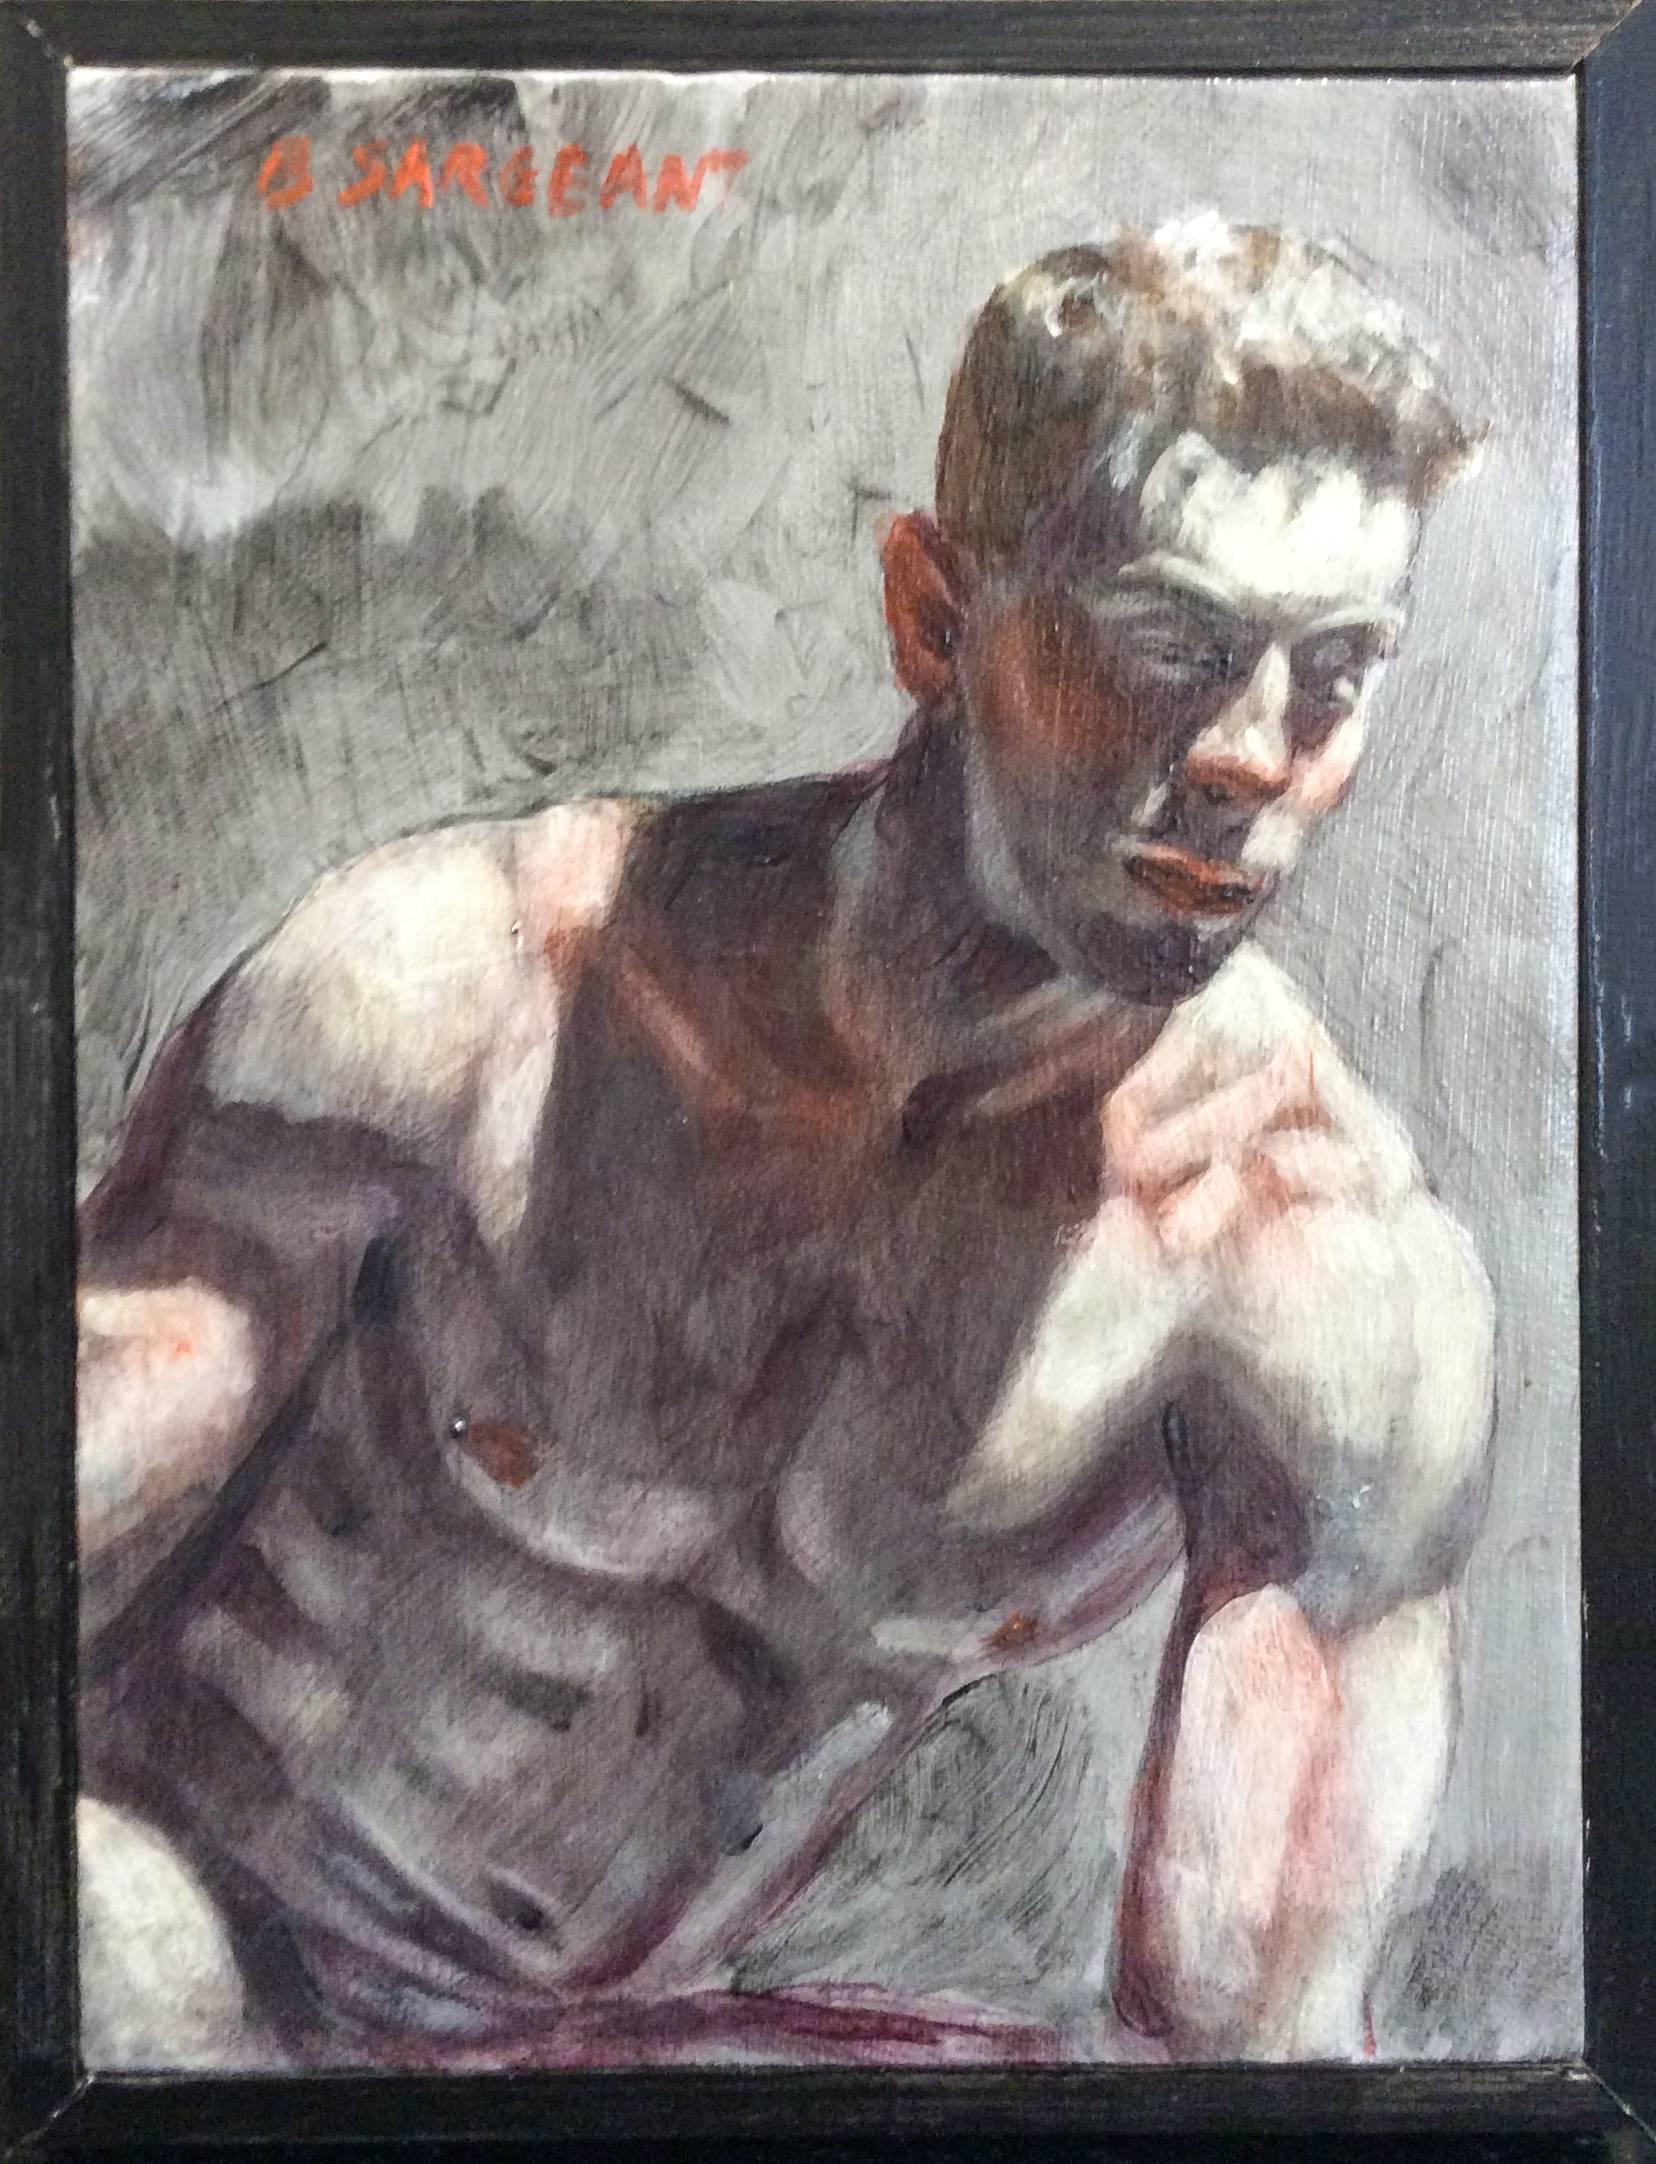 Mark Beard Figurative Painting - Toned Torso (Small, Academic Style Figurative Oil Painting of Seated Male Nude)